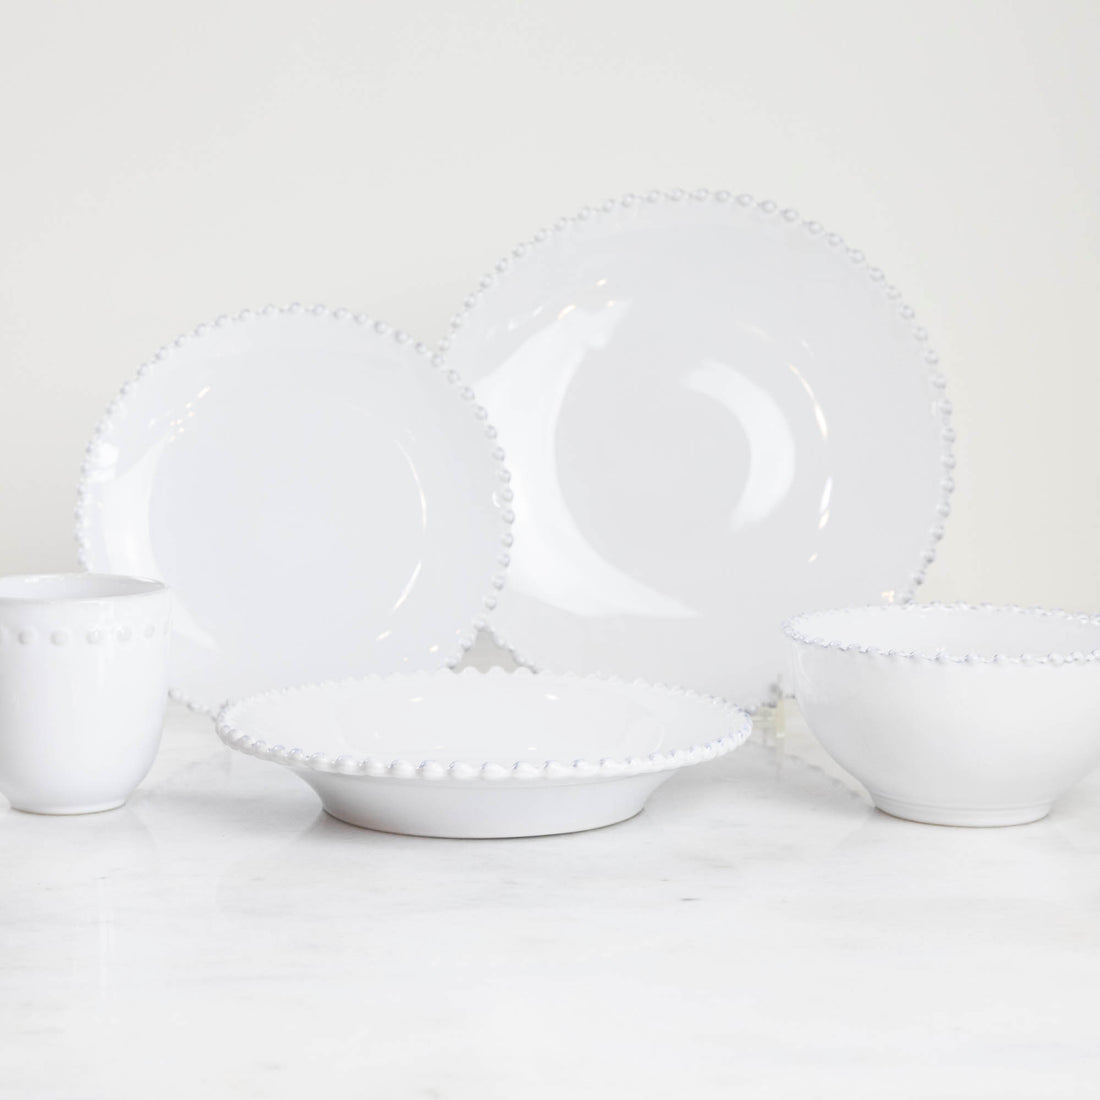 A set of Costa Nova Pearl White Dinnerware with beaded edge design displayed against a light background.